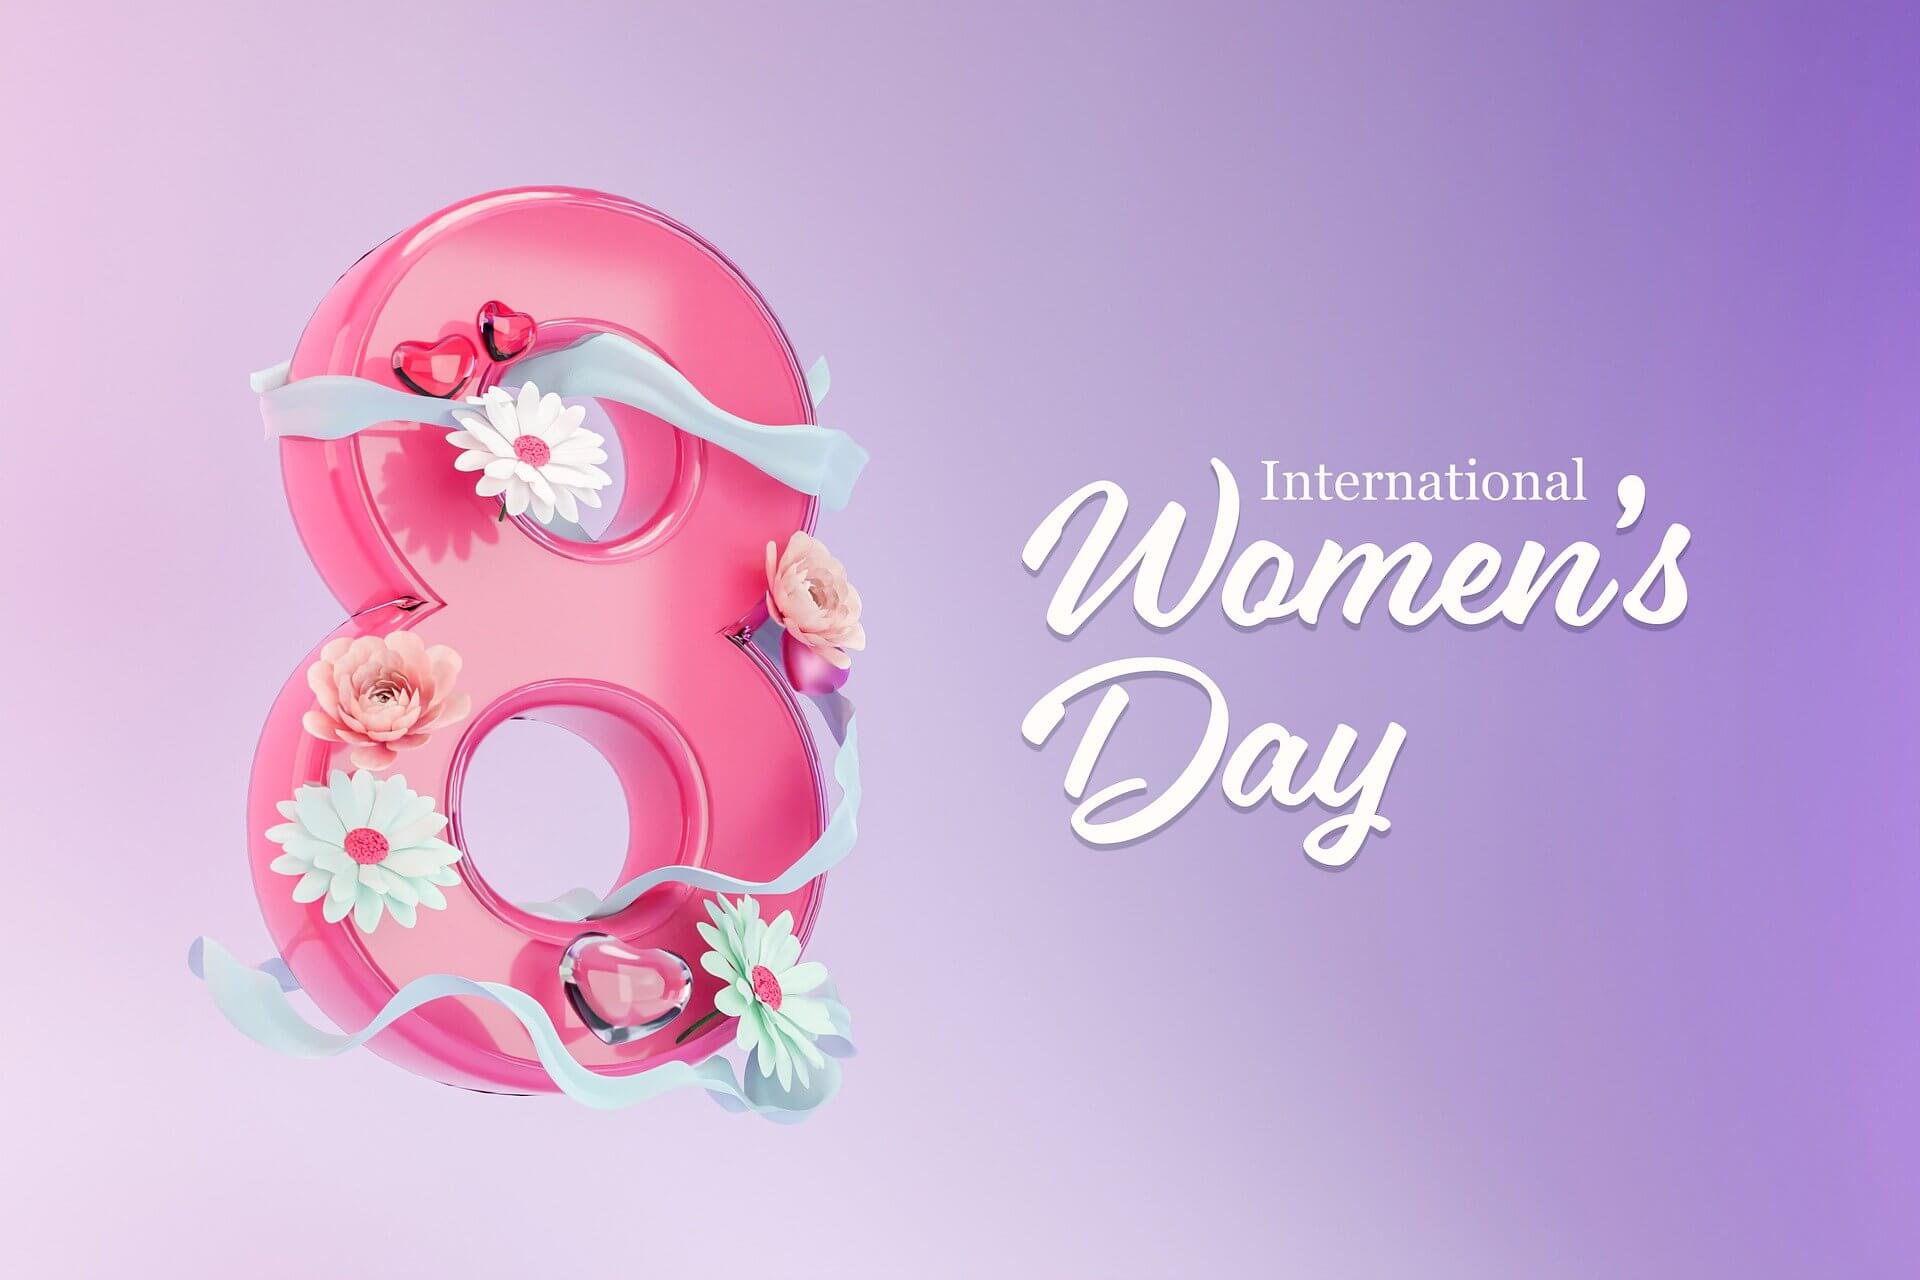 Happy Women's Day Images